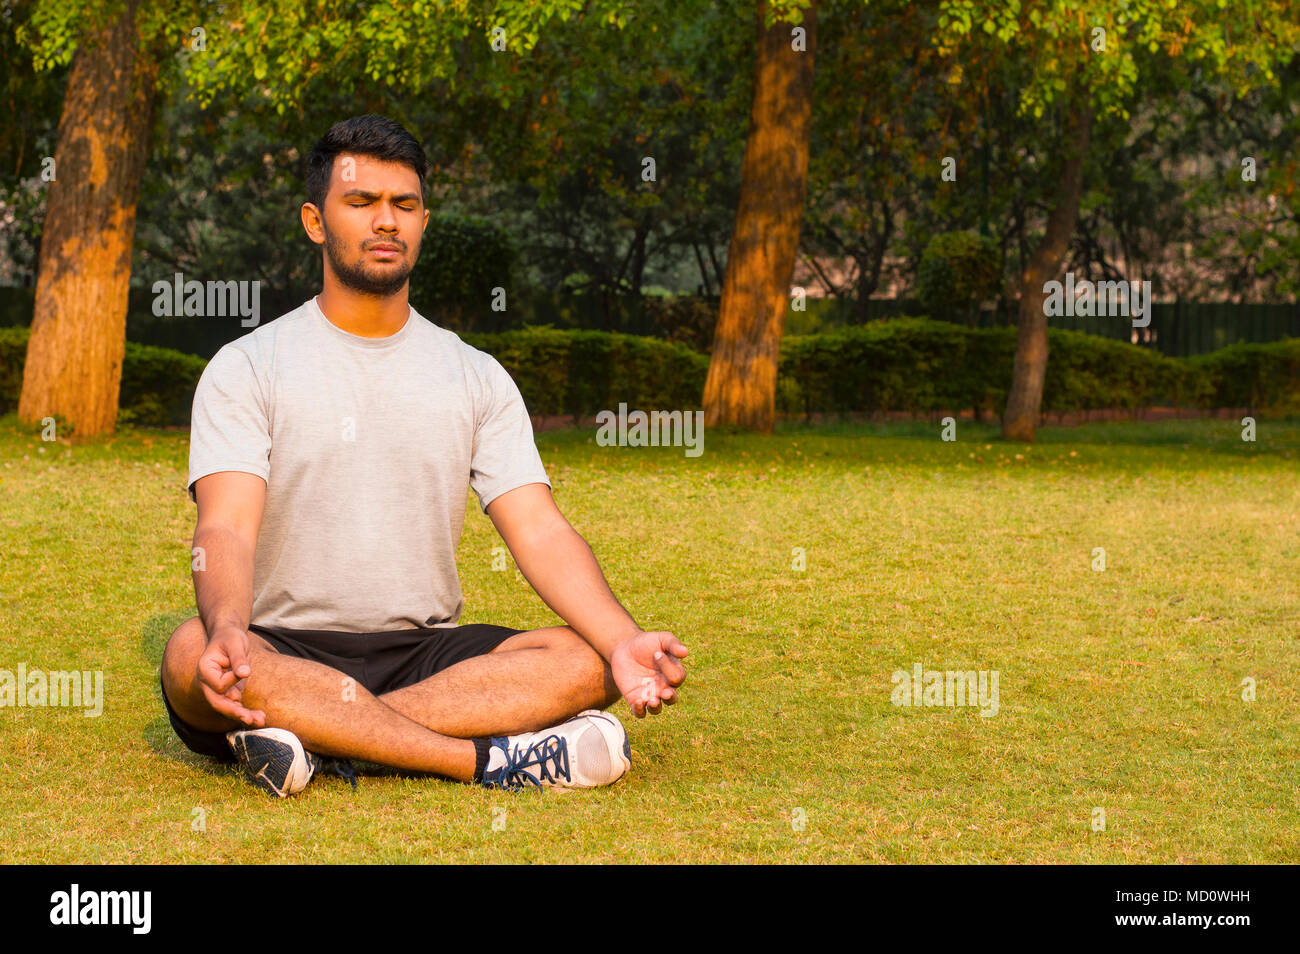 Young guy doing yoga lotus pose in a park Stock Photo